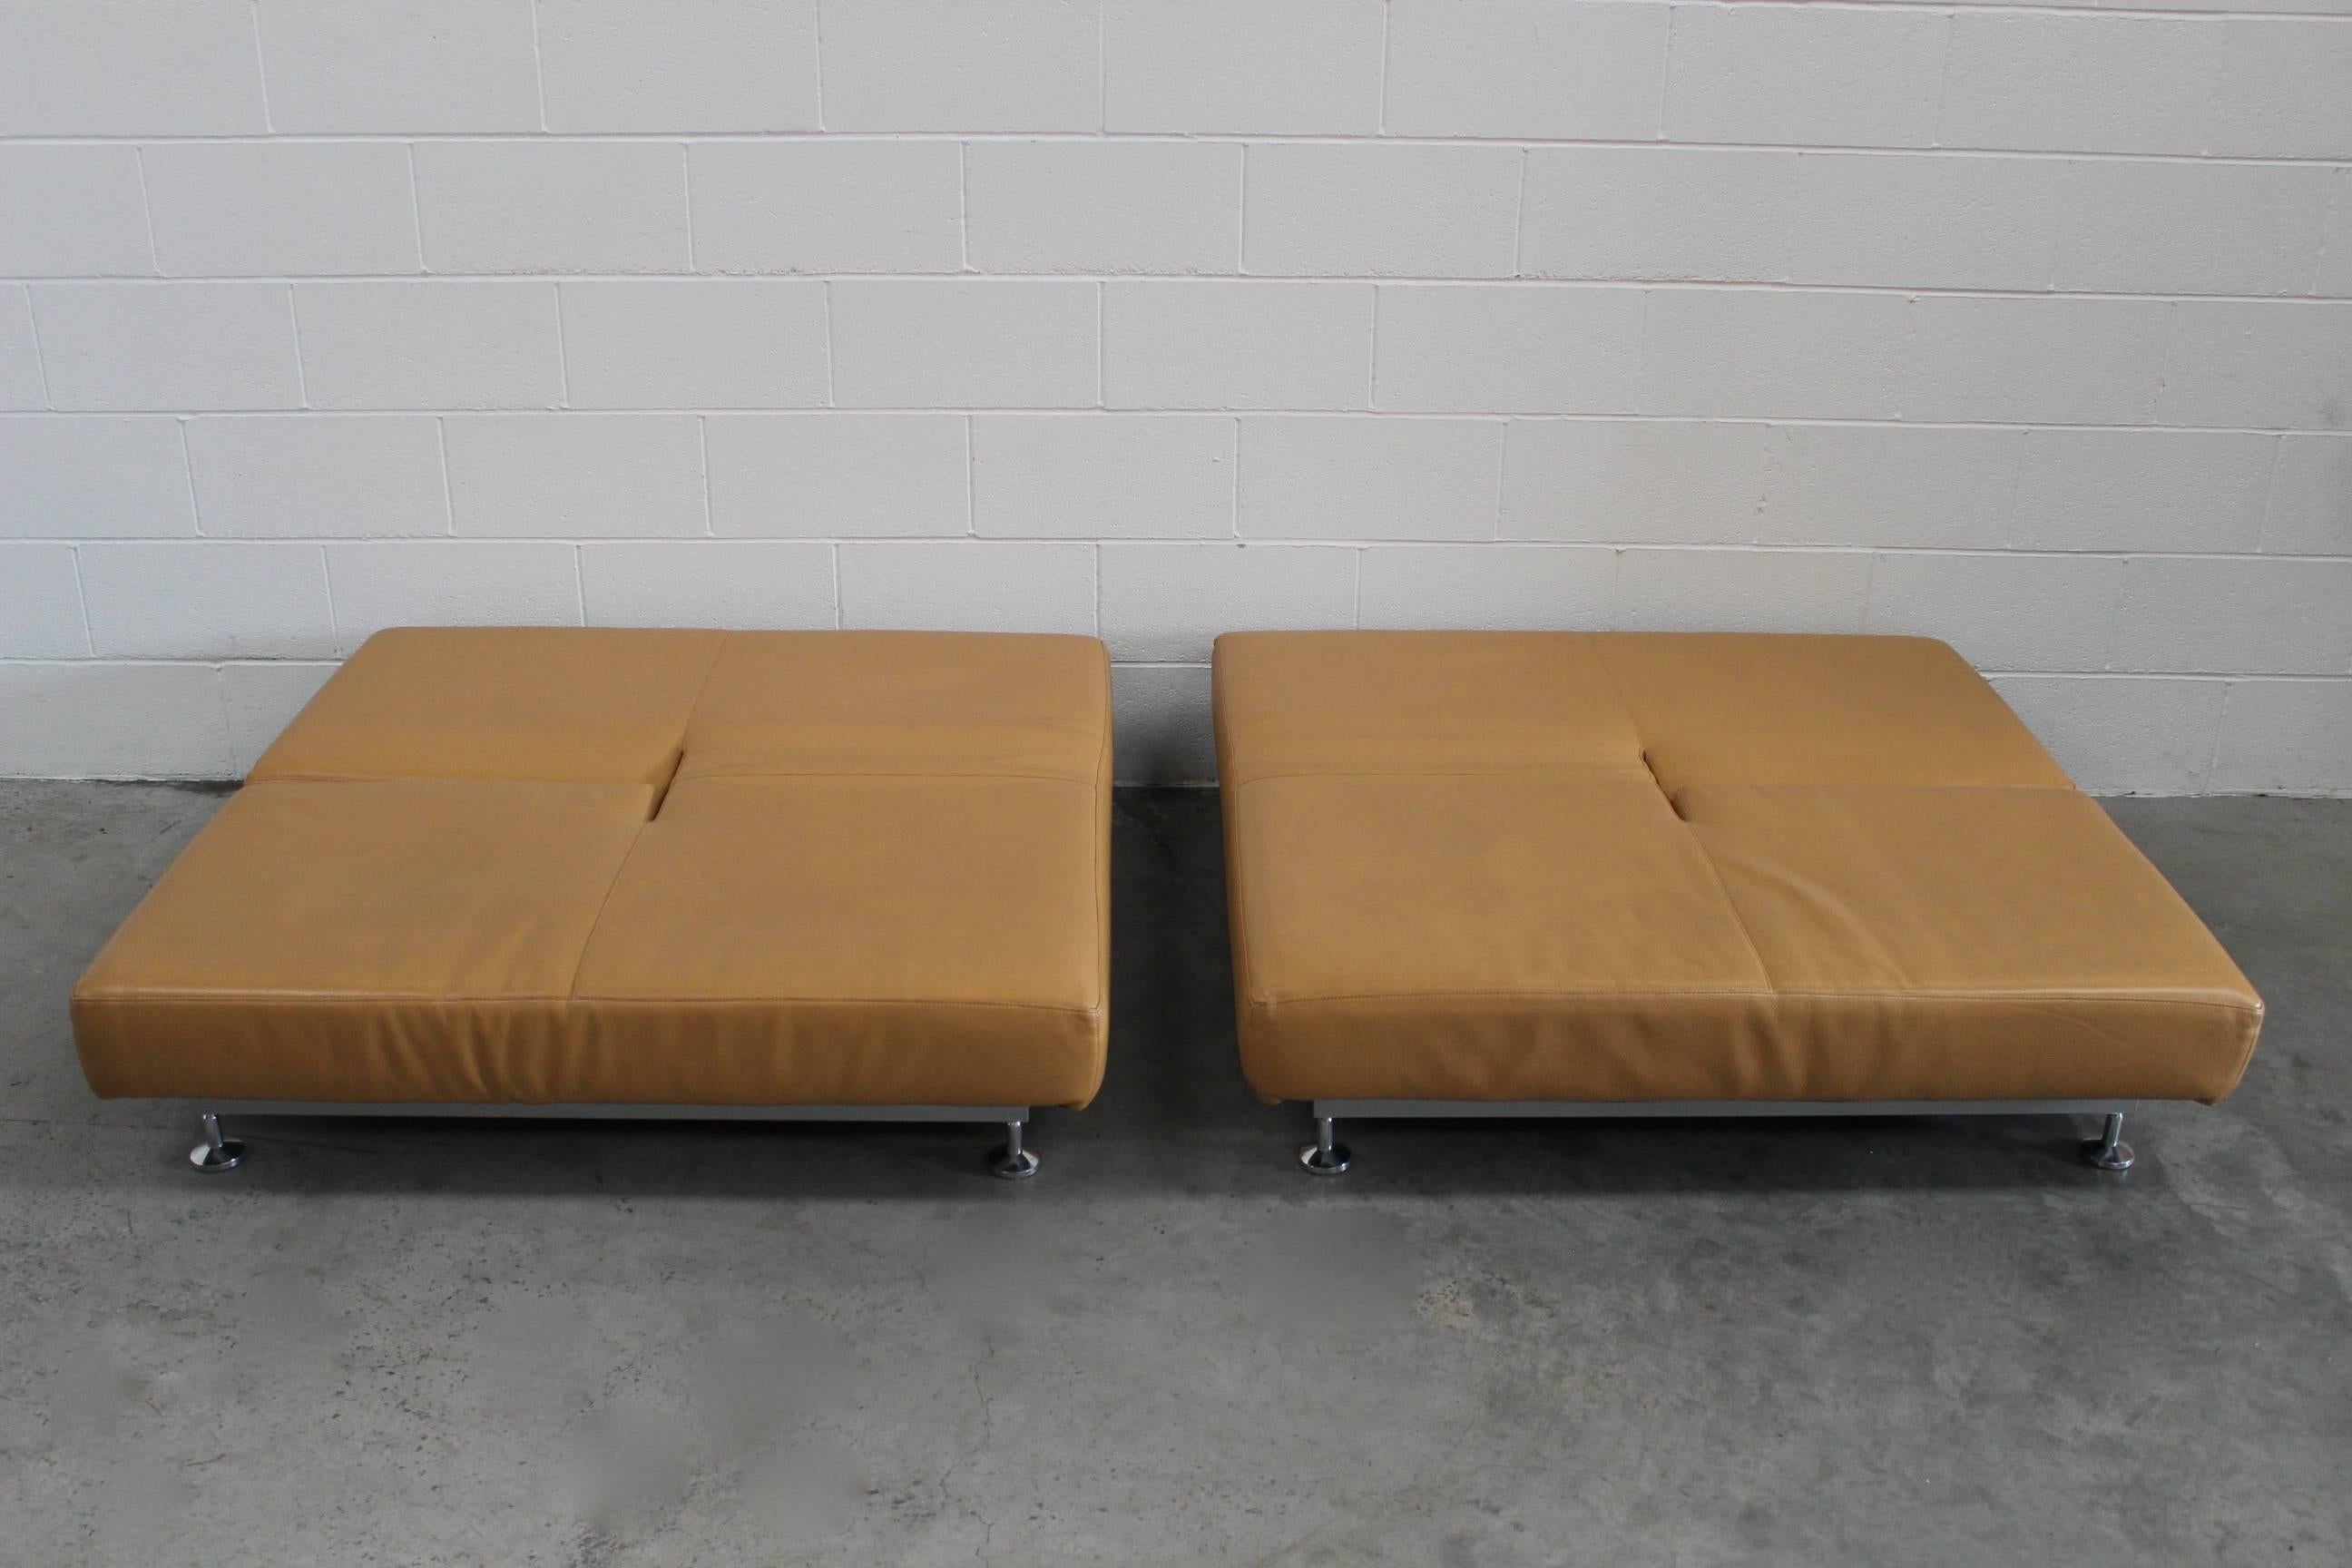 Hand-Crafted Pair of Edra “Damier” Sofa or Chaise Units in Tan Leather by Francesco Binafare